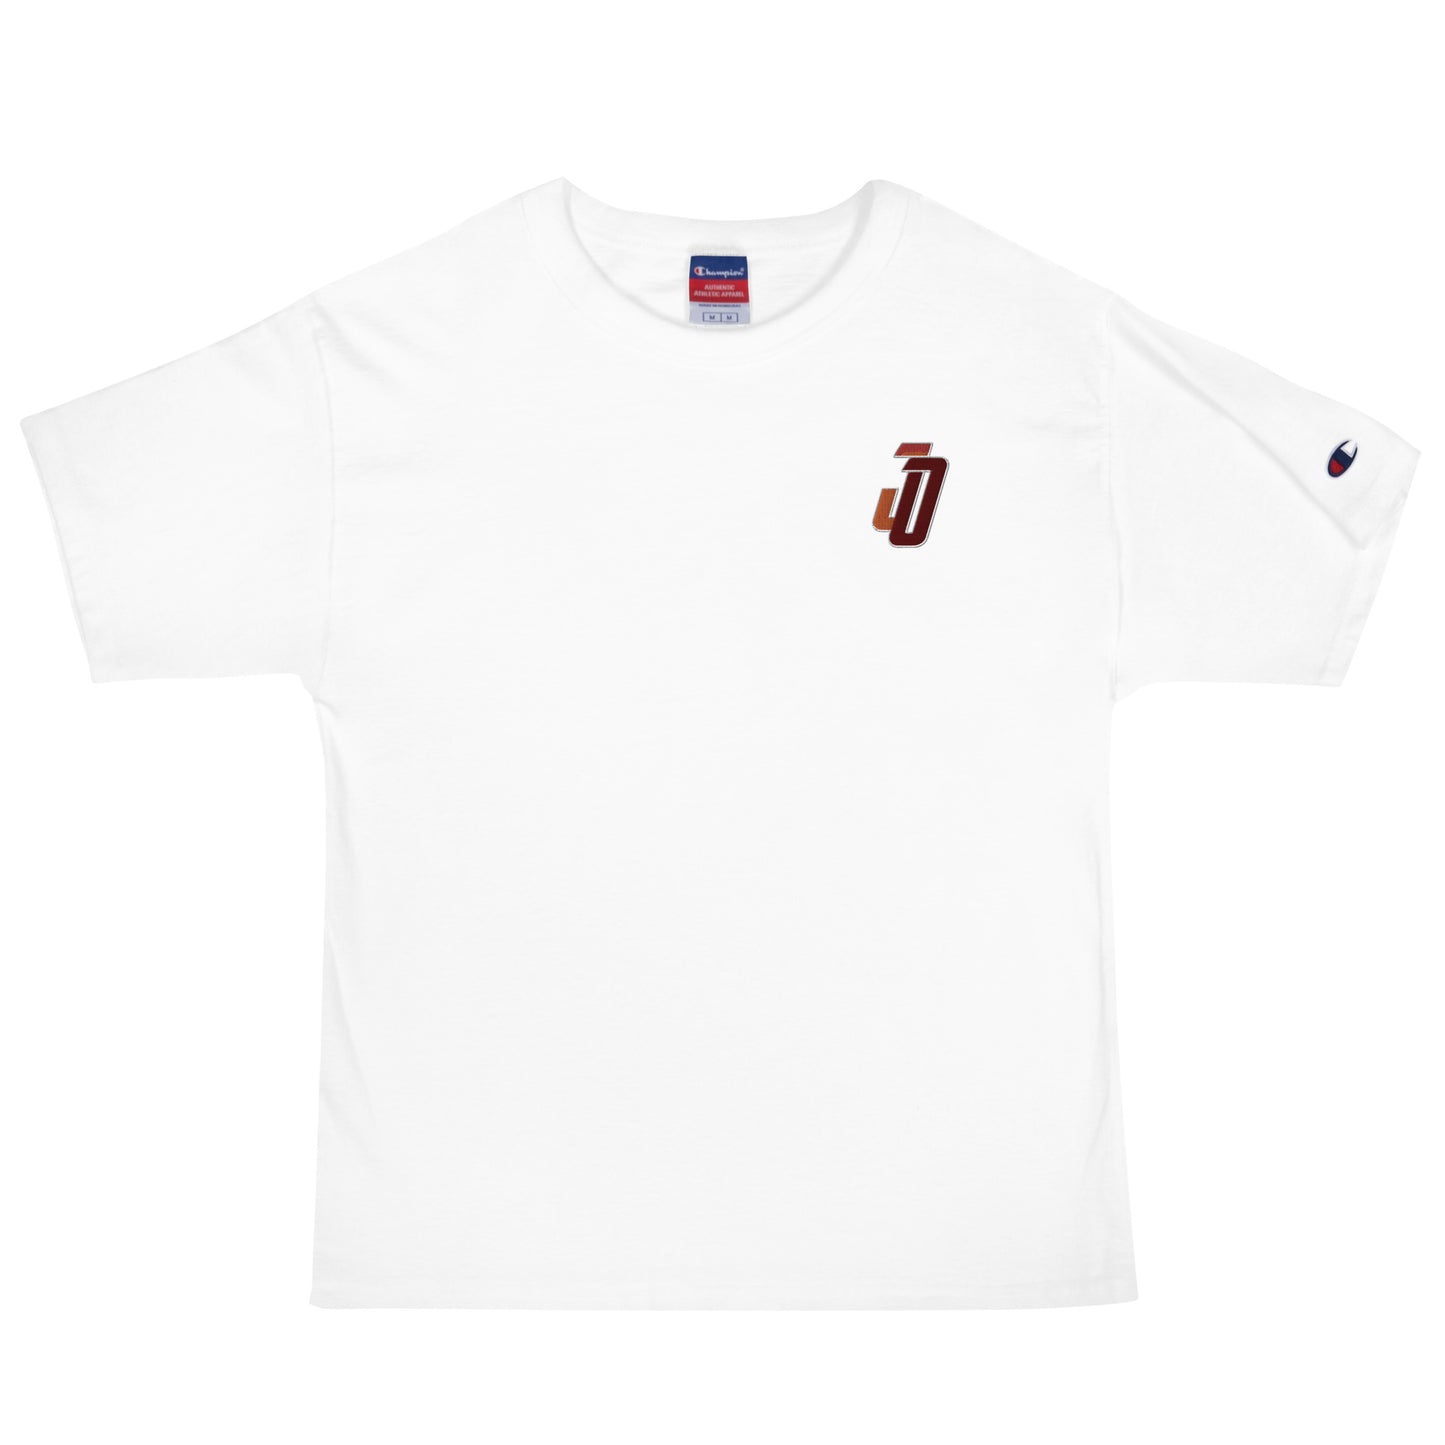 JO Embroidered Men's Champion T-Shirt